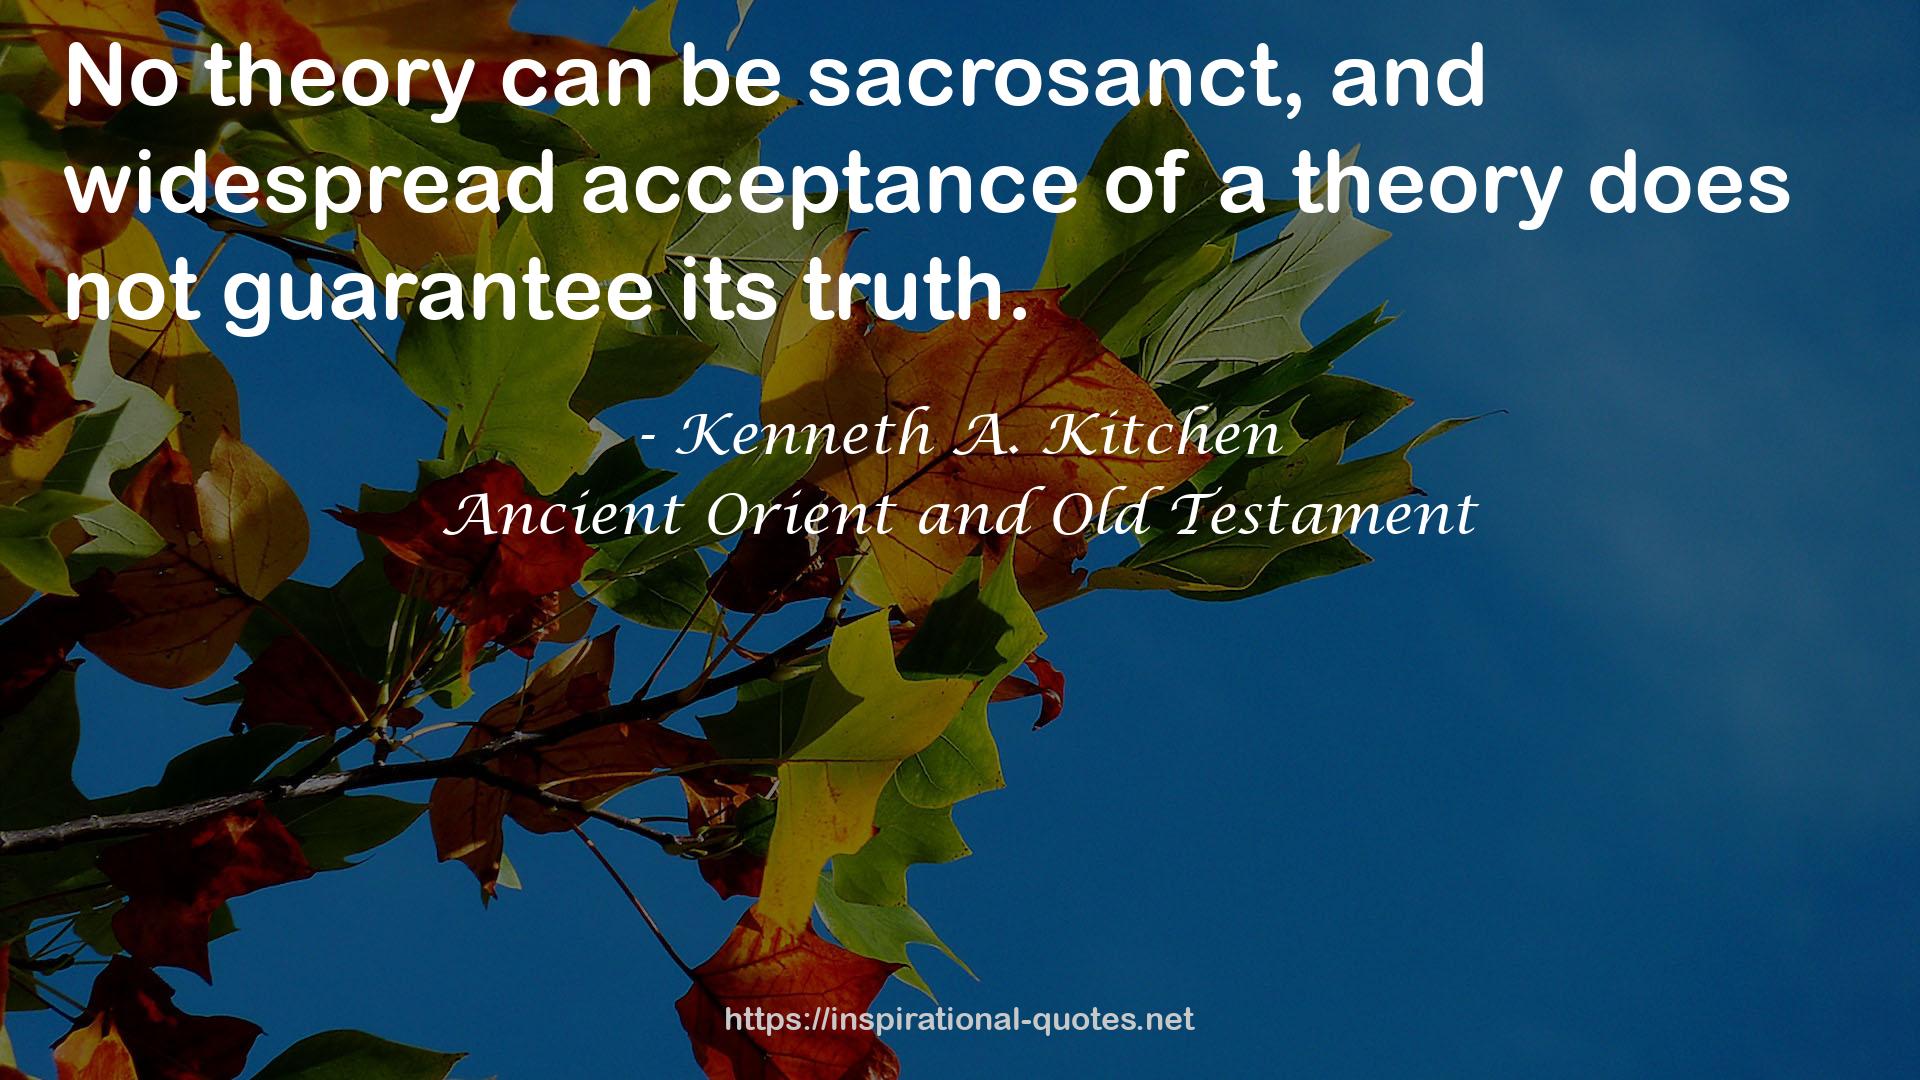 Ancient Orient and Old Testament QUOTES